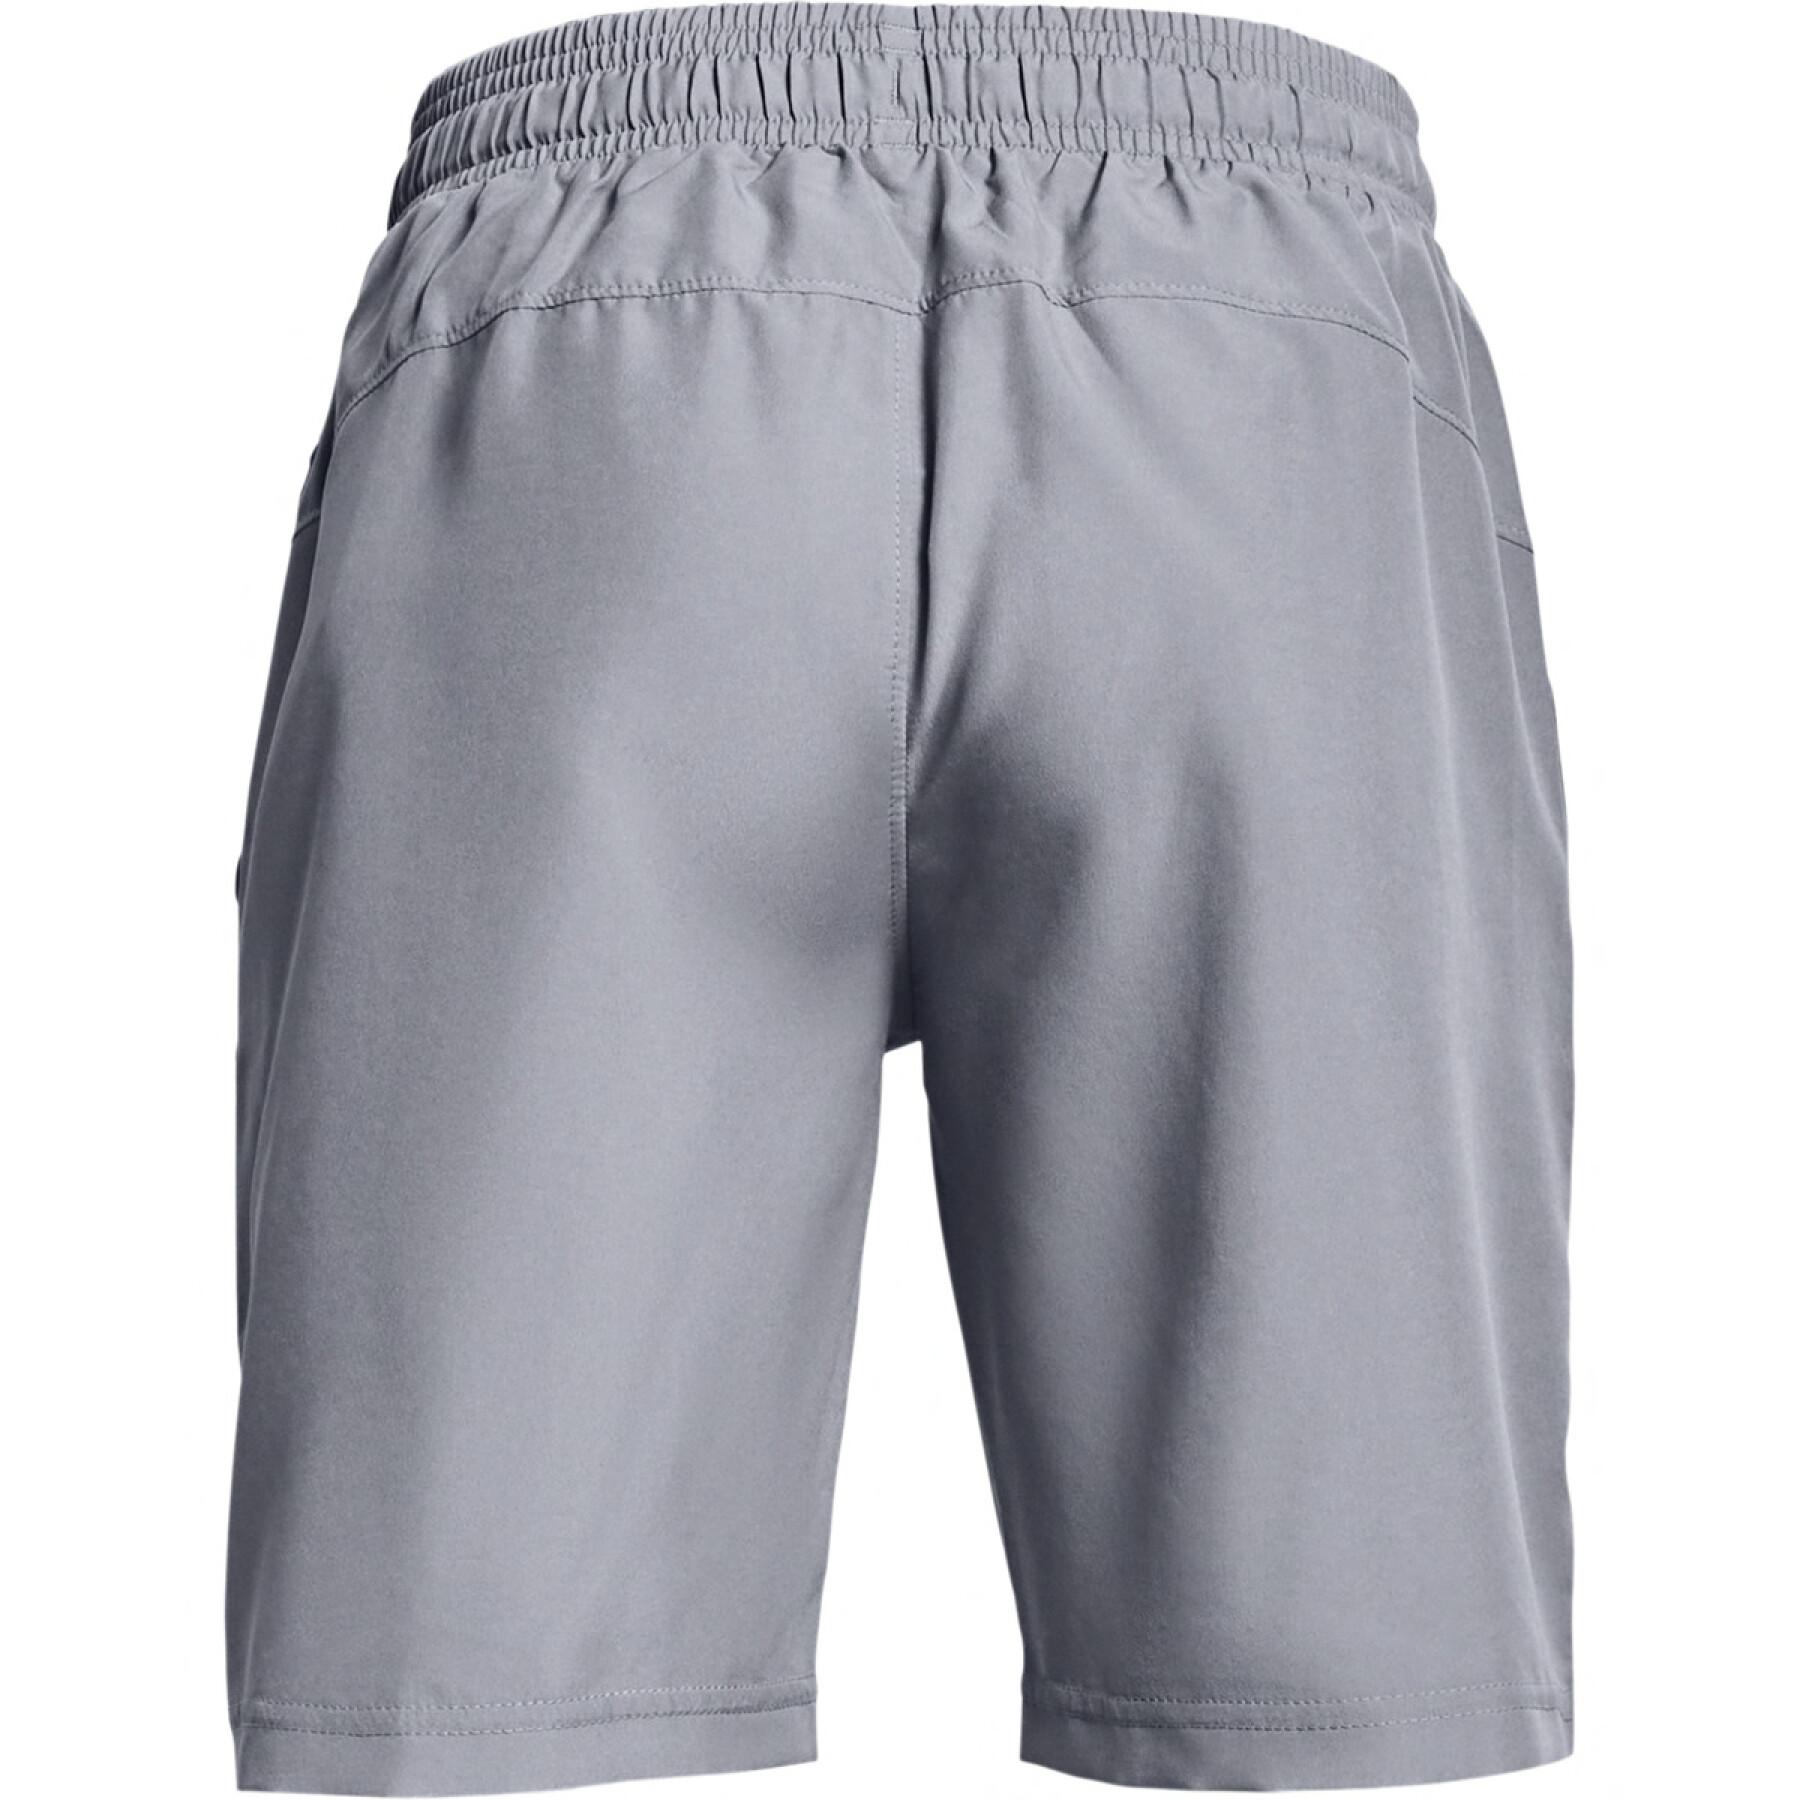 Kinder shorts Under Armour Woven